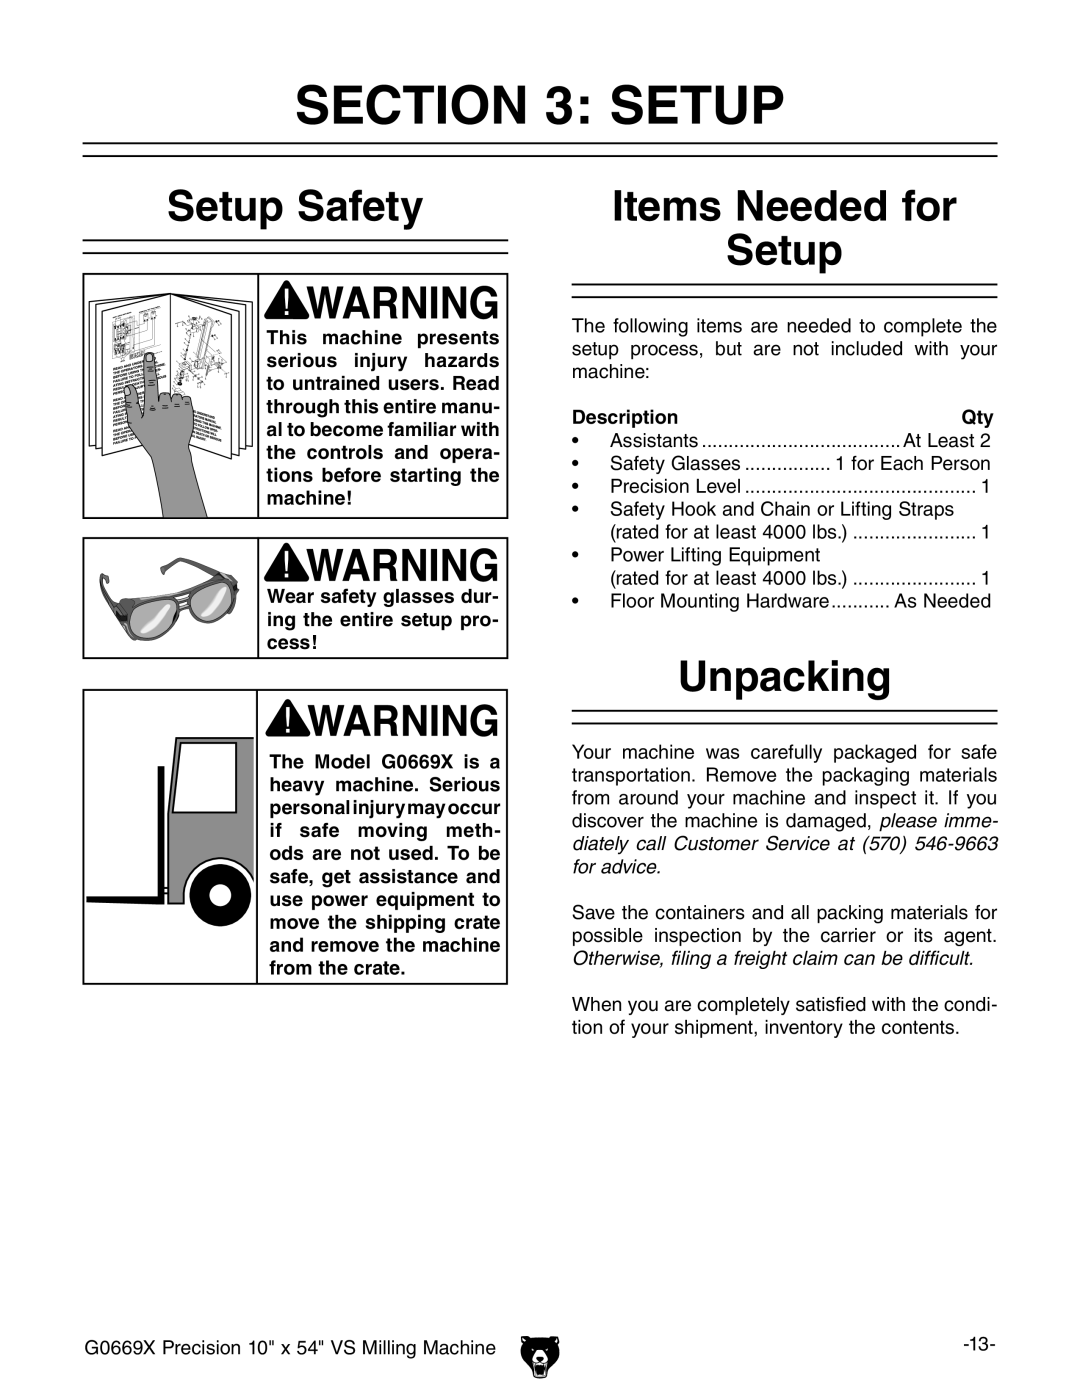 Grizzly g0669X owner manual Setup Safety, Items Needed for Setup, Unpacking, Description 